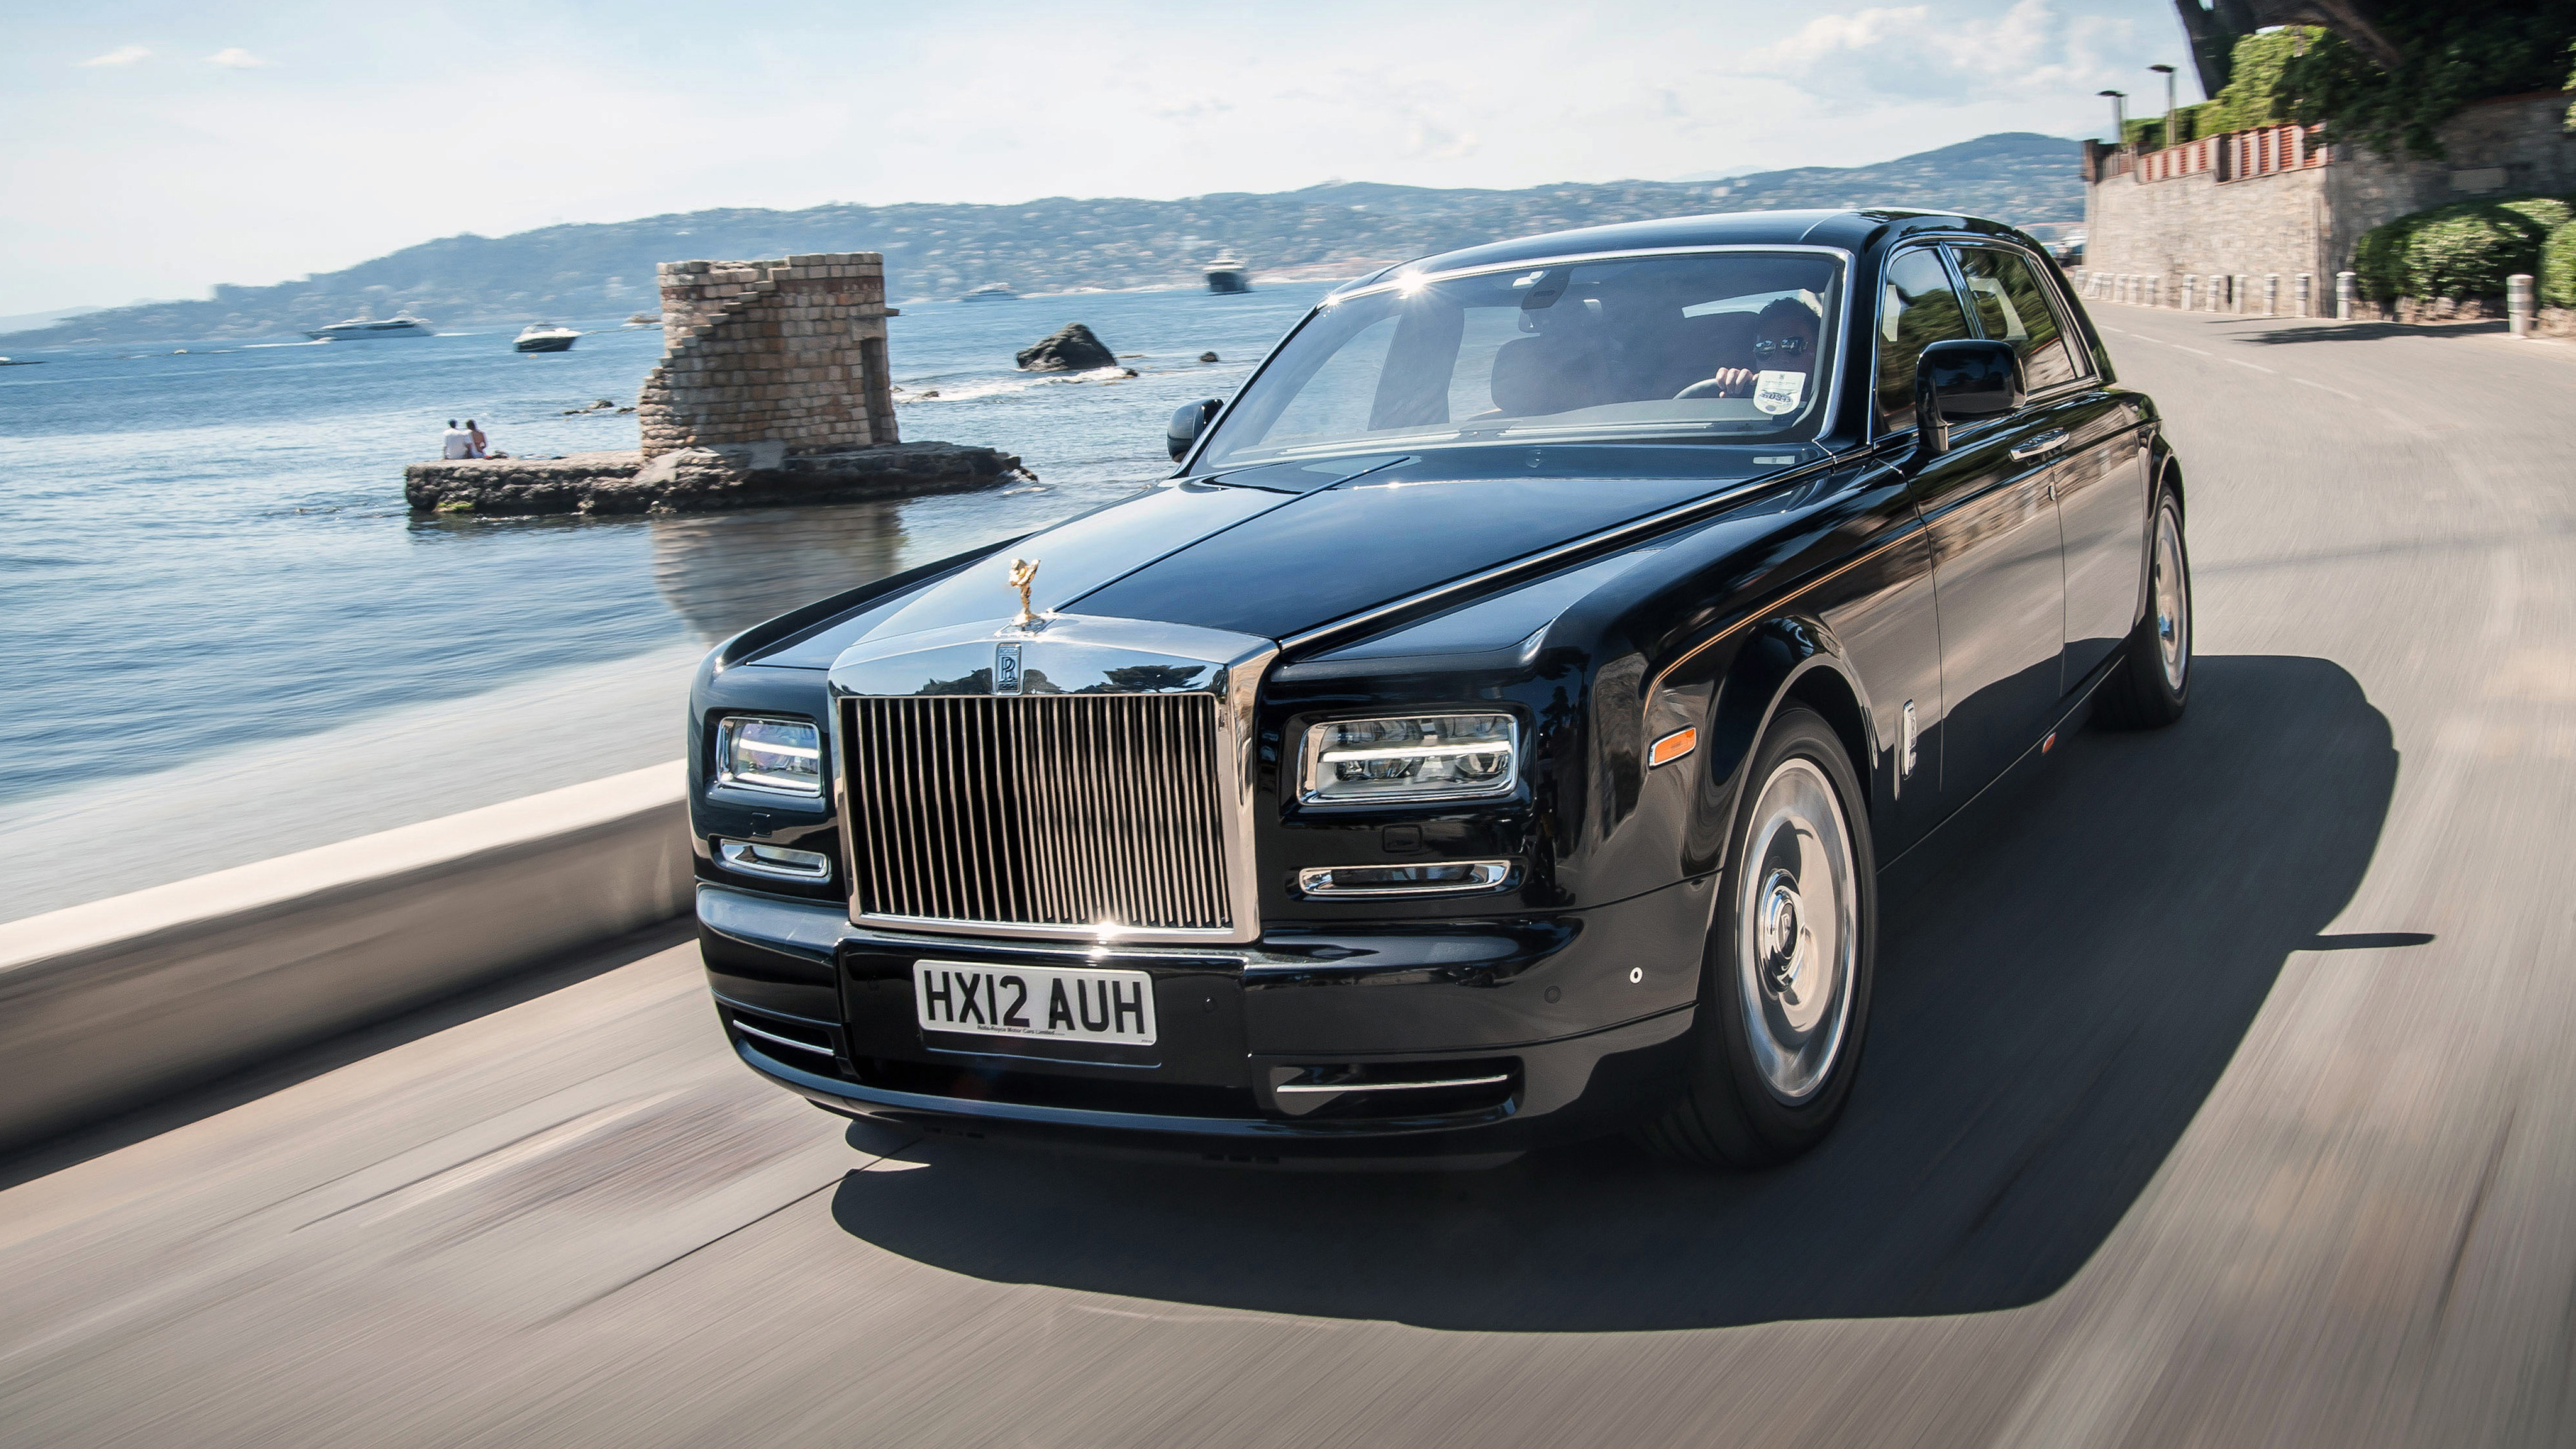 Car Rolls Royce Luxury Cars British Cars Frontal View Licence Plates Water Road Sunlight Vehicle Dri 4096x2304